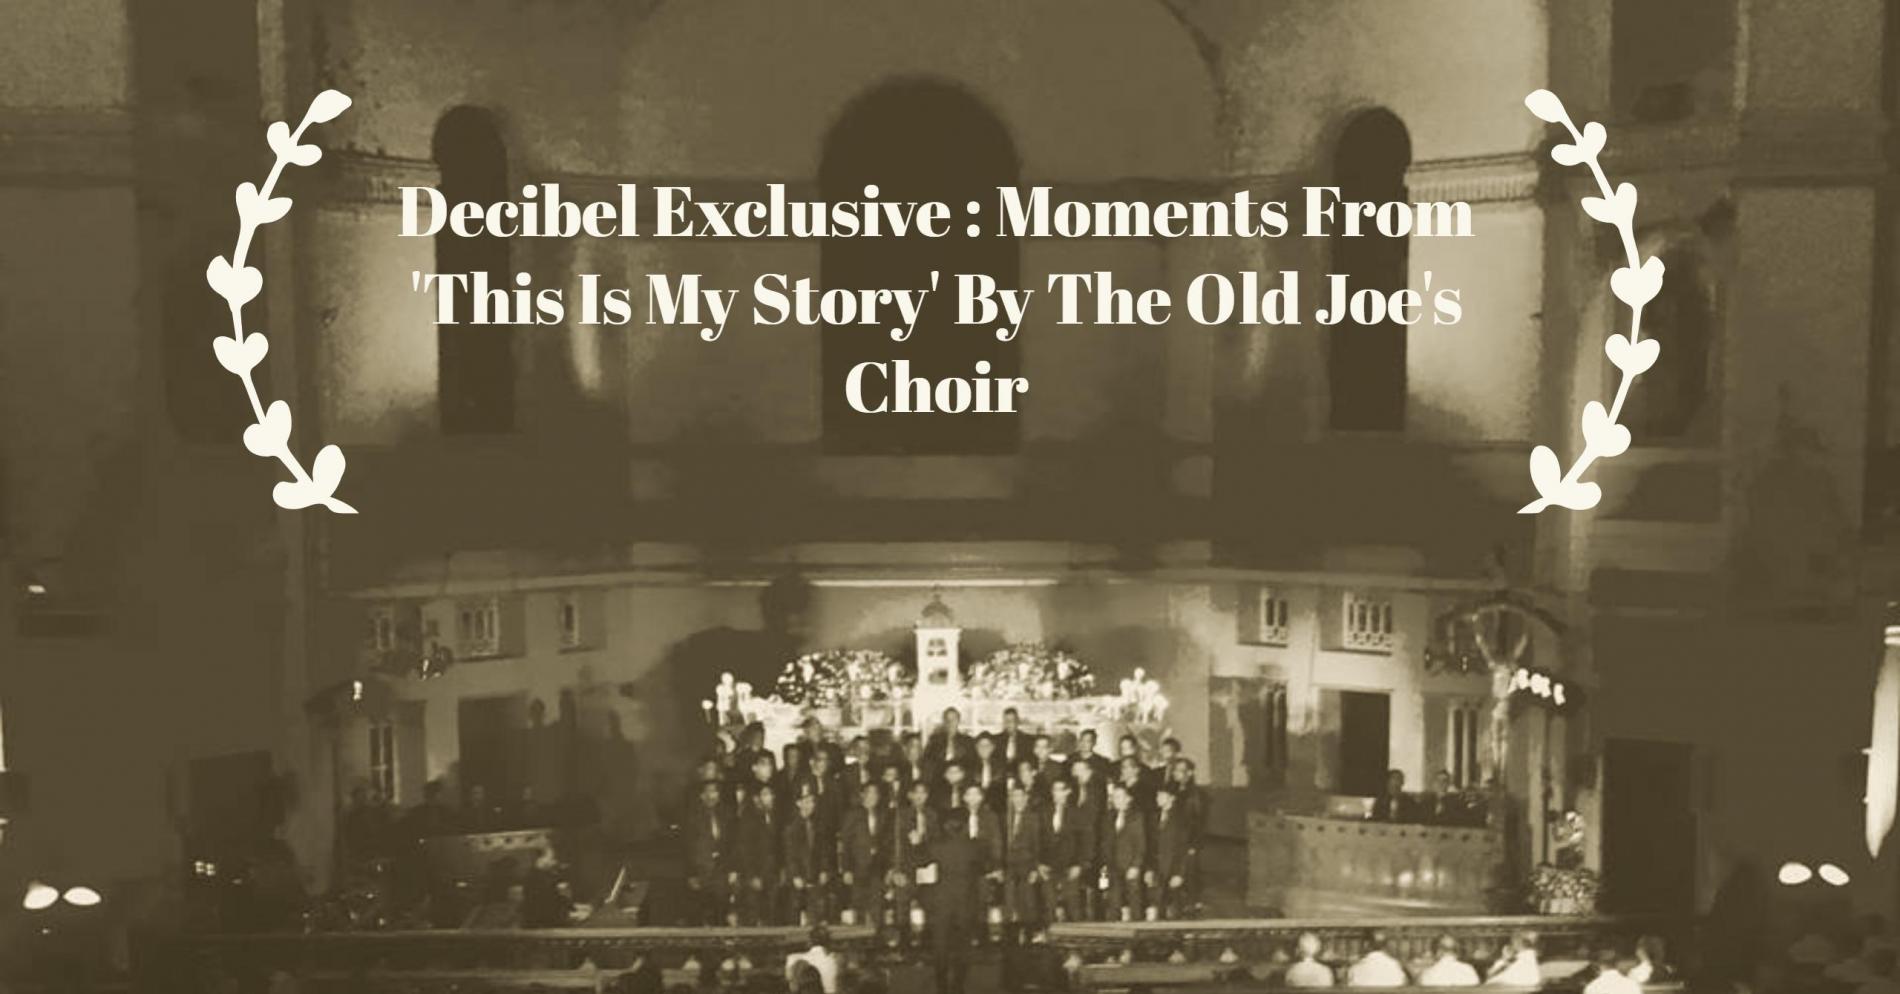 Decibel Exclusive : Moments From ‘This Is My Story’ By The Old Joe’s Choir